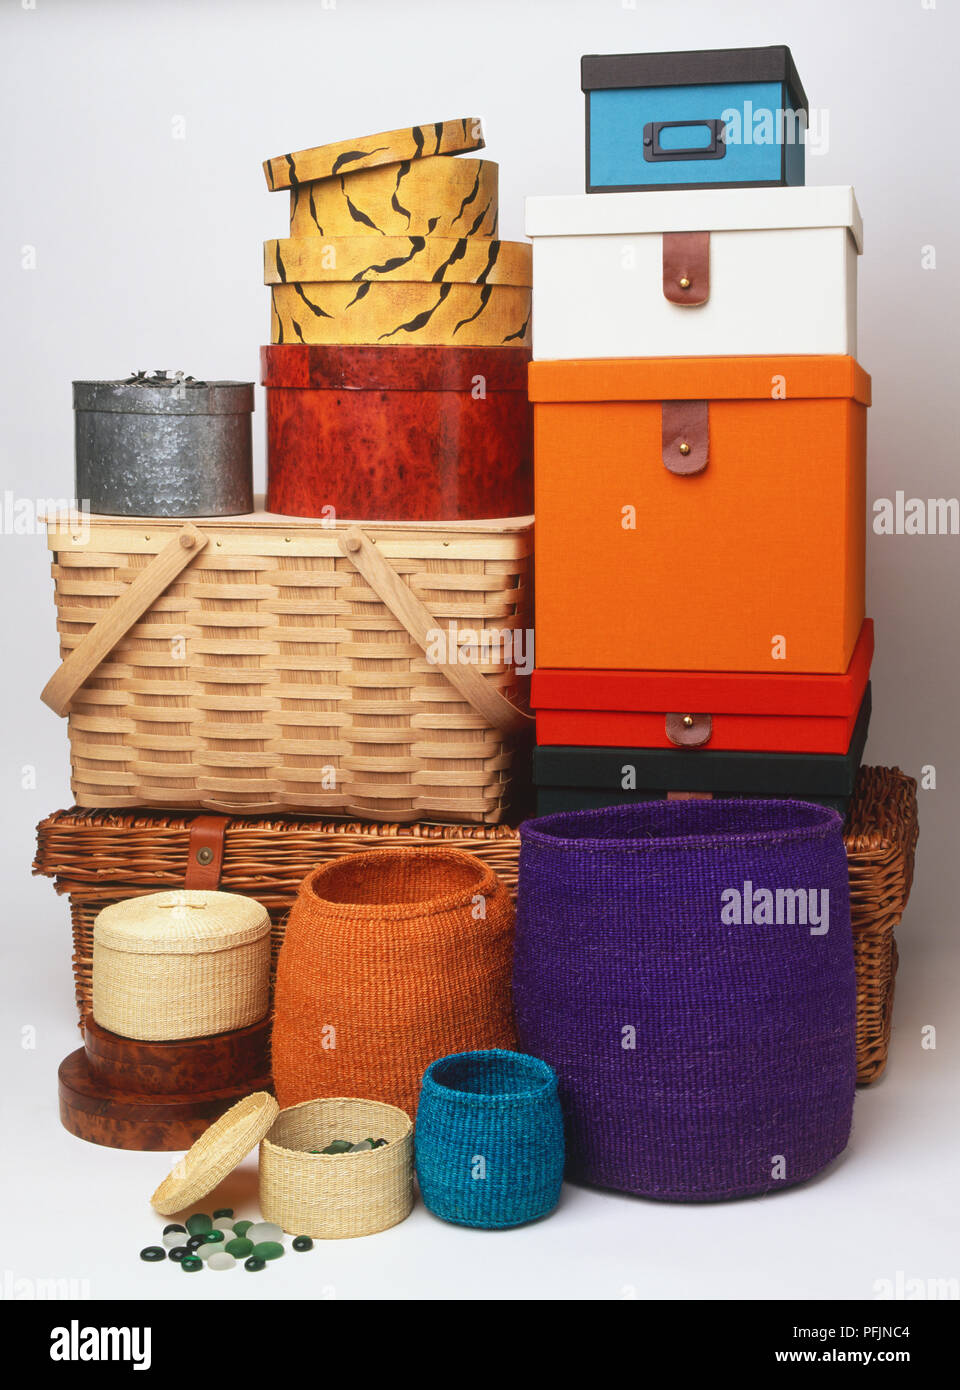 Colourful selection of storage boxes and baskets made of cardboard and wicker. Stock Photo